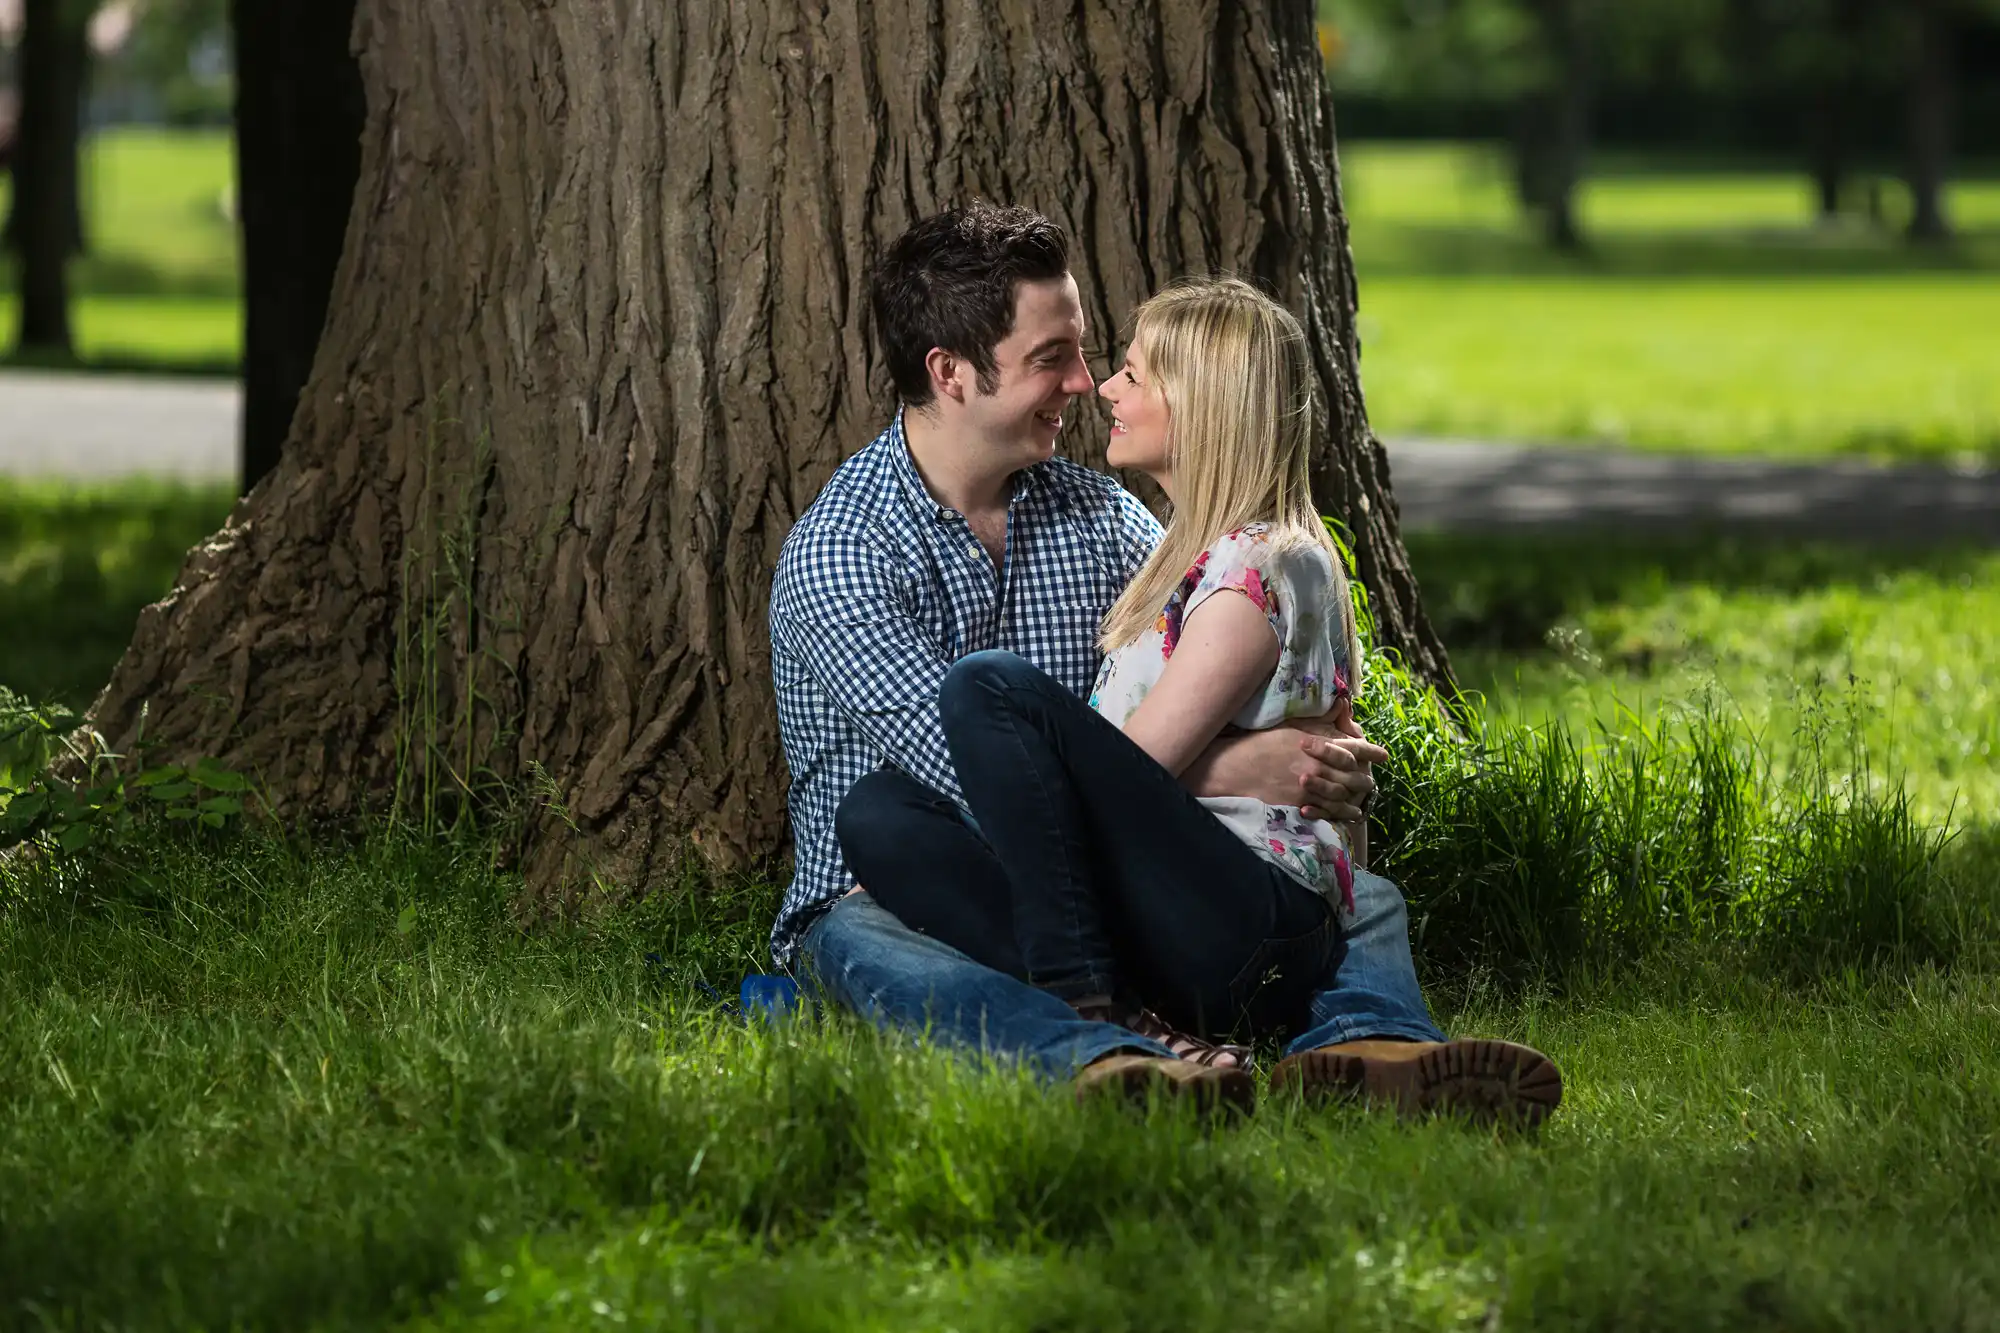 A couple sitting and smiling at each other by a large tree in a lush green park.